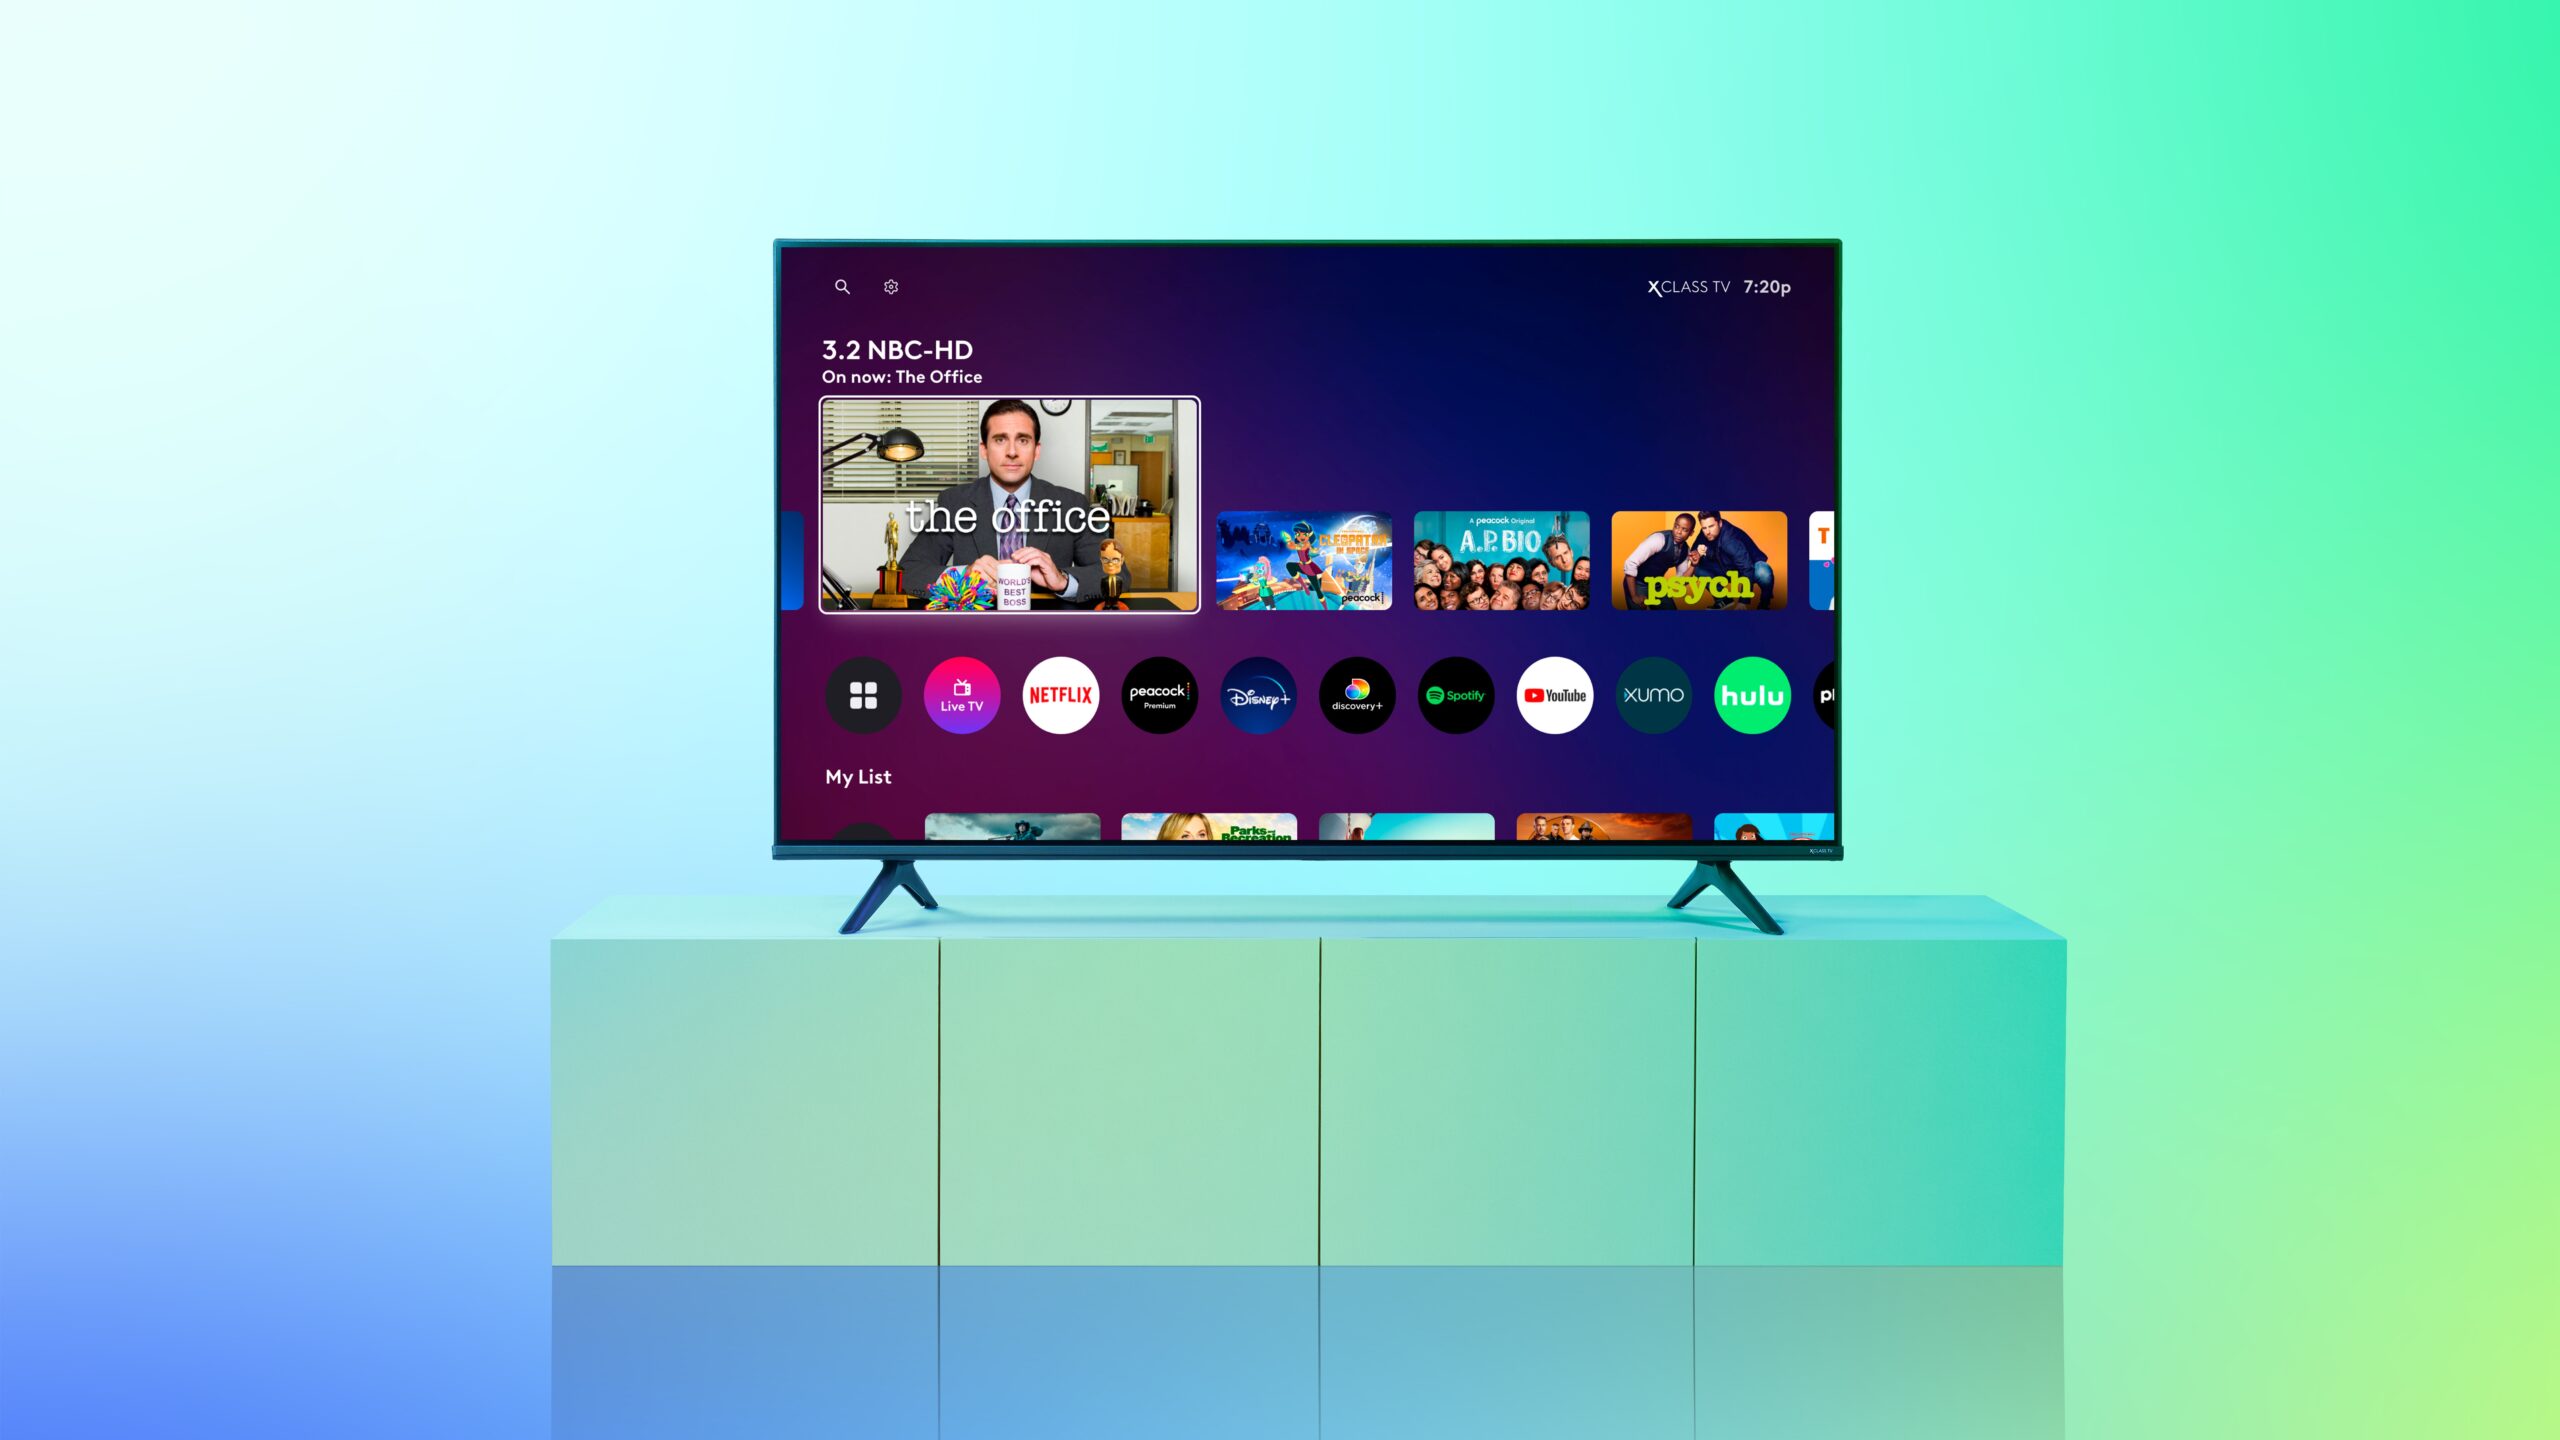 Comcast’s New XClass Smart TVs are Here Just in Time for Black Friday & the Holiday Shopping Season